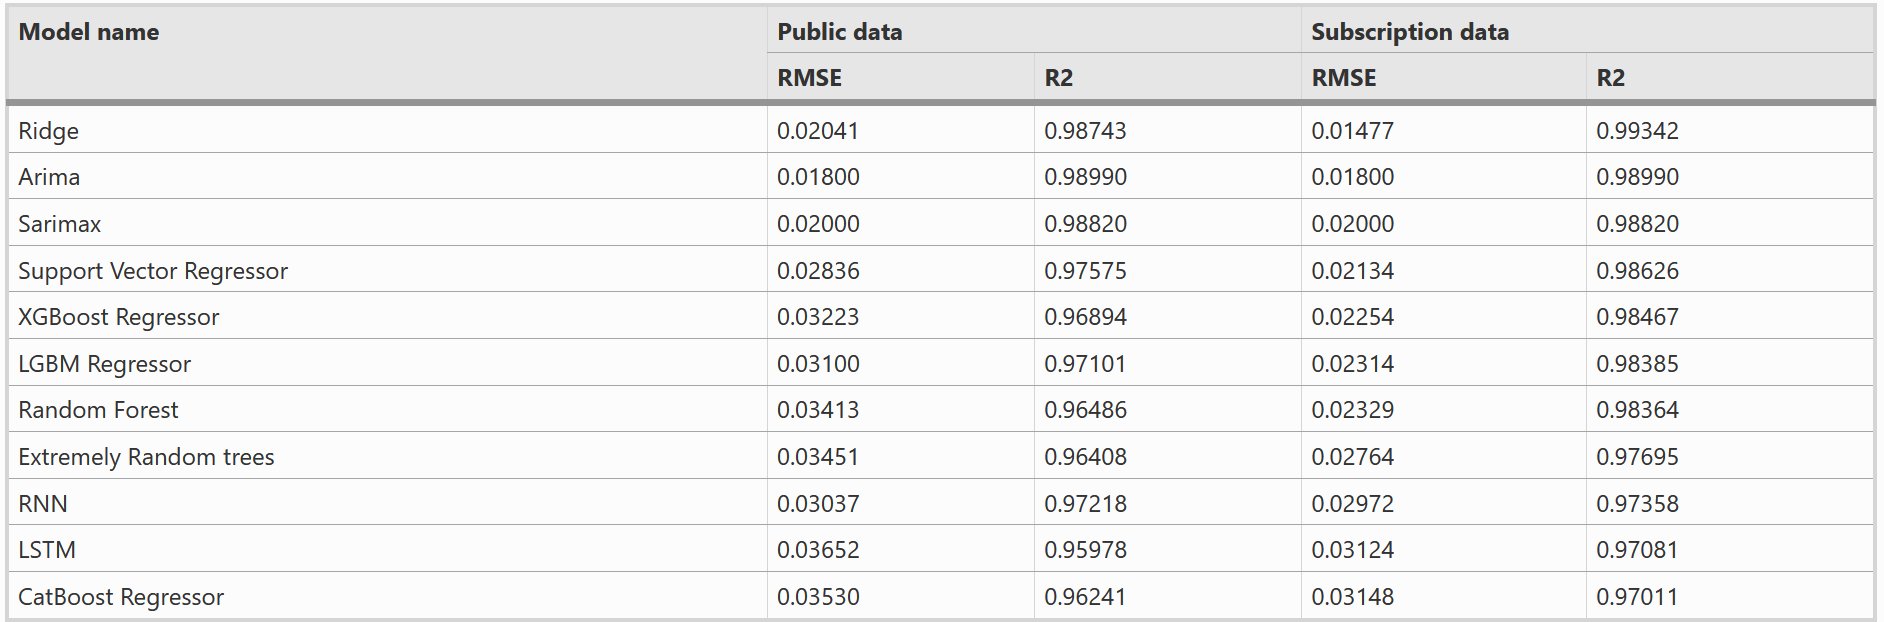 Table 2: Comparison of model performances using public and subscription data